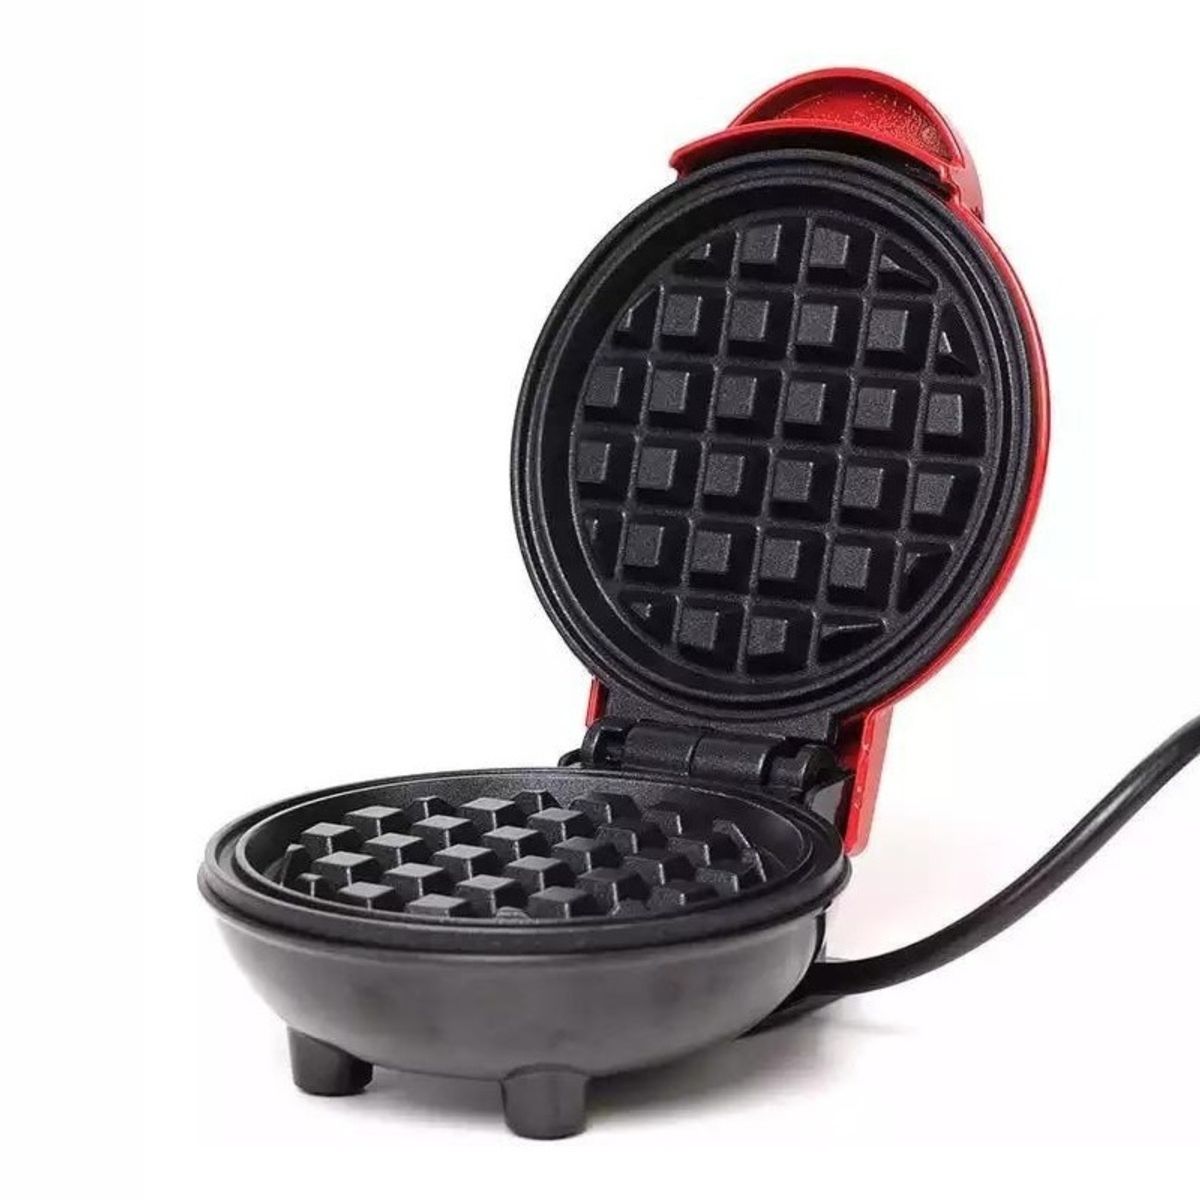 Mini Waffle Maker Machine, 350W Portable Electric Non-Stick Waffle Iron,  Small Compact Design, Easy to Clean, Non-Stick Surfaces, Perfect for  Breakfast, Dessert, Sandwich, or Other Snacks,Pink - Yahoo Shopping